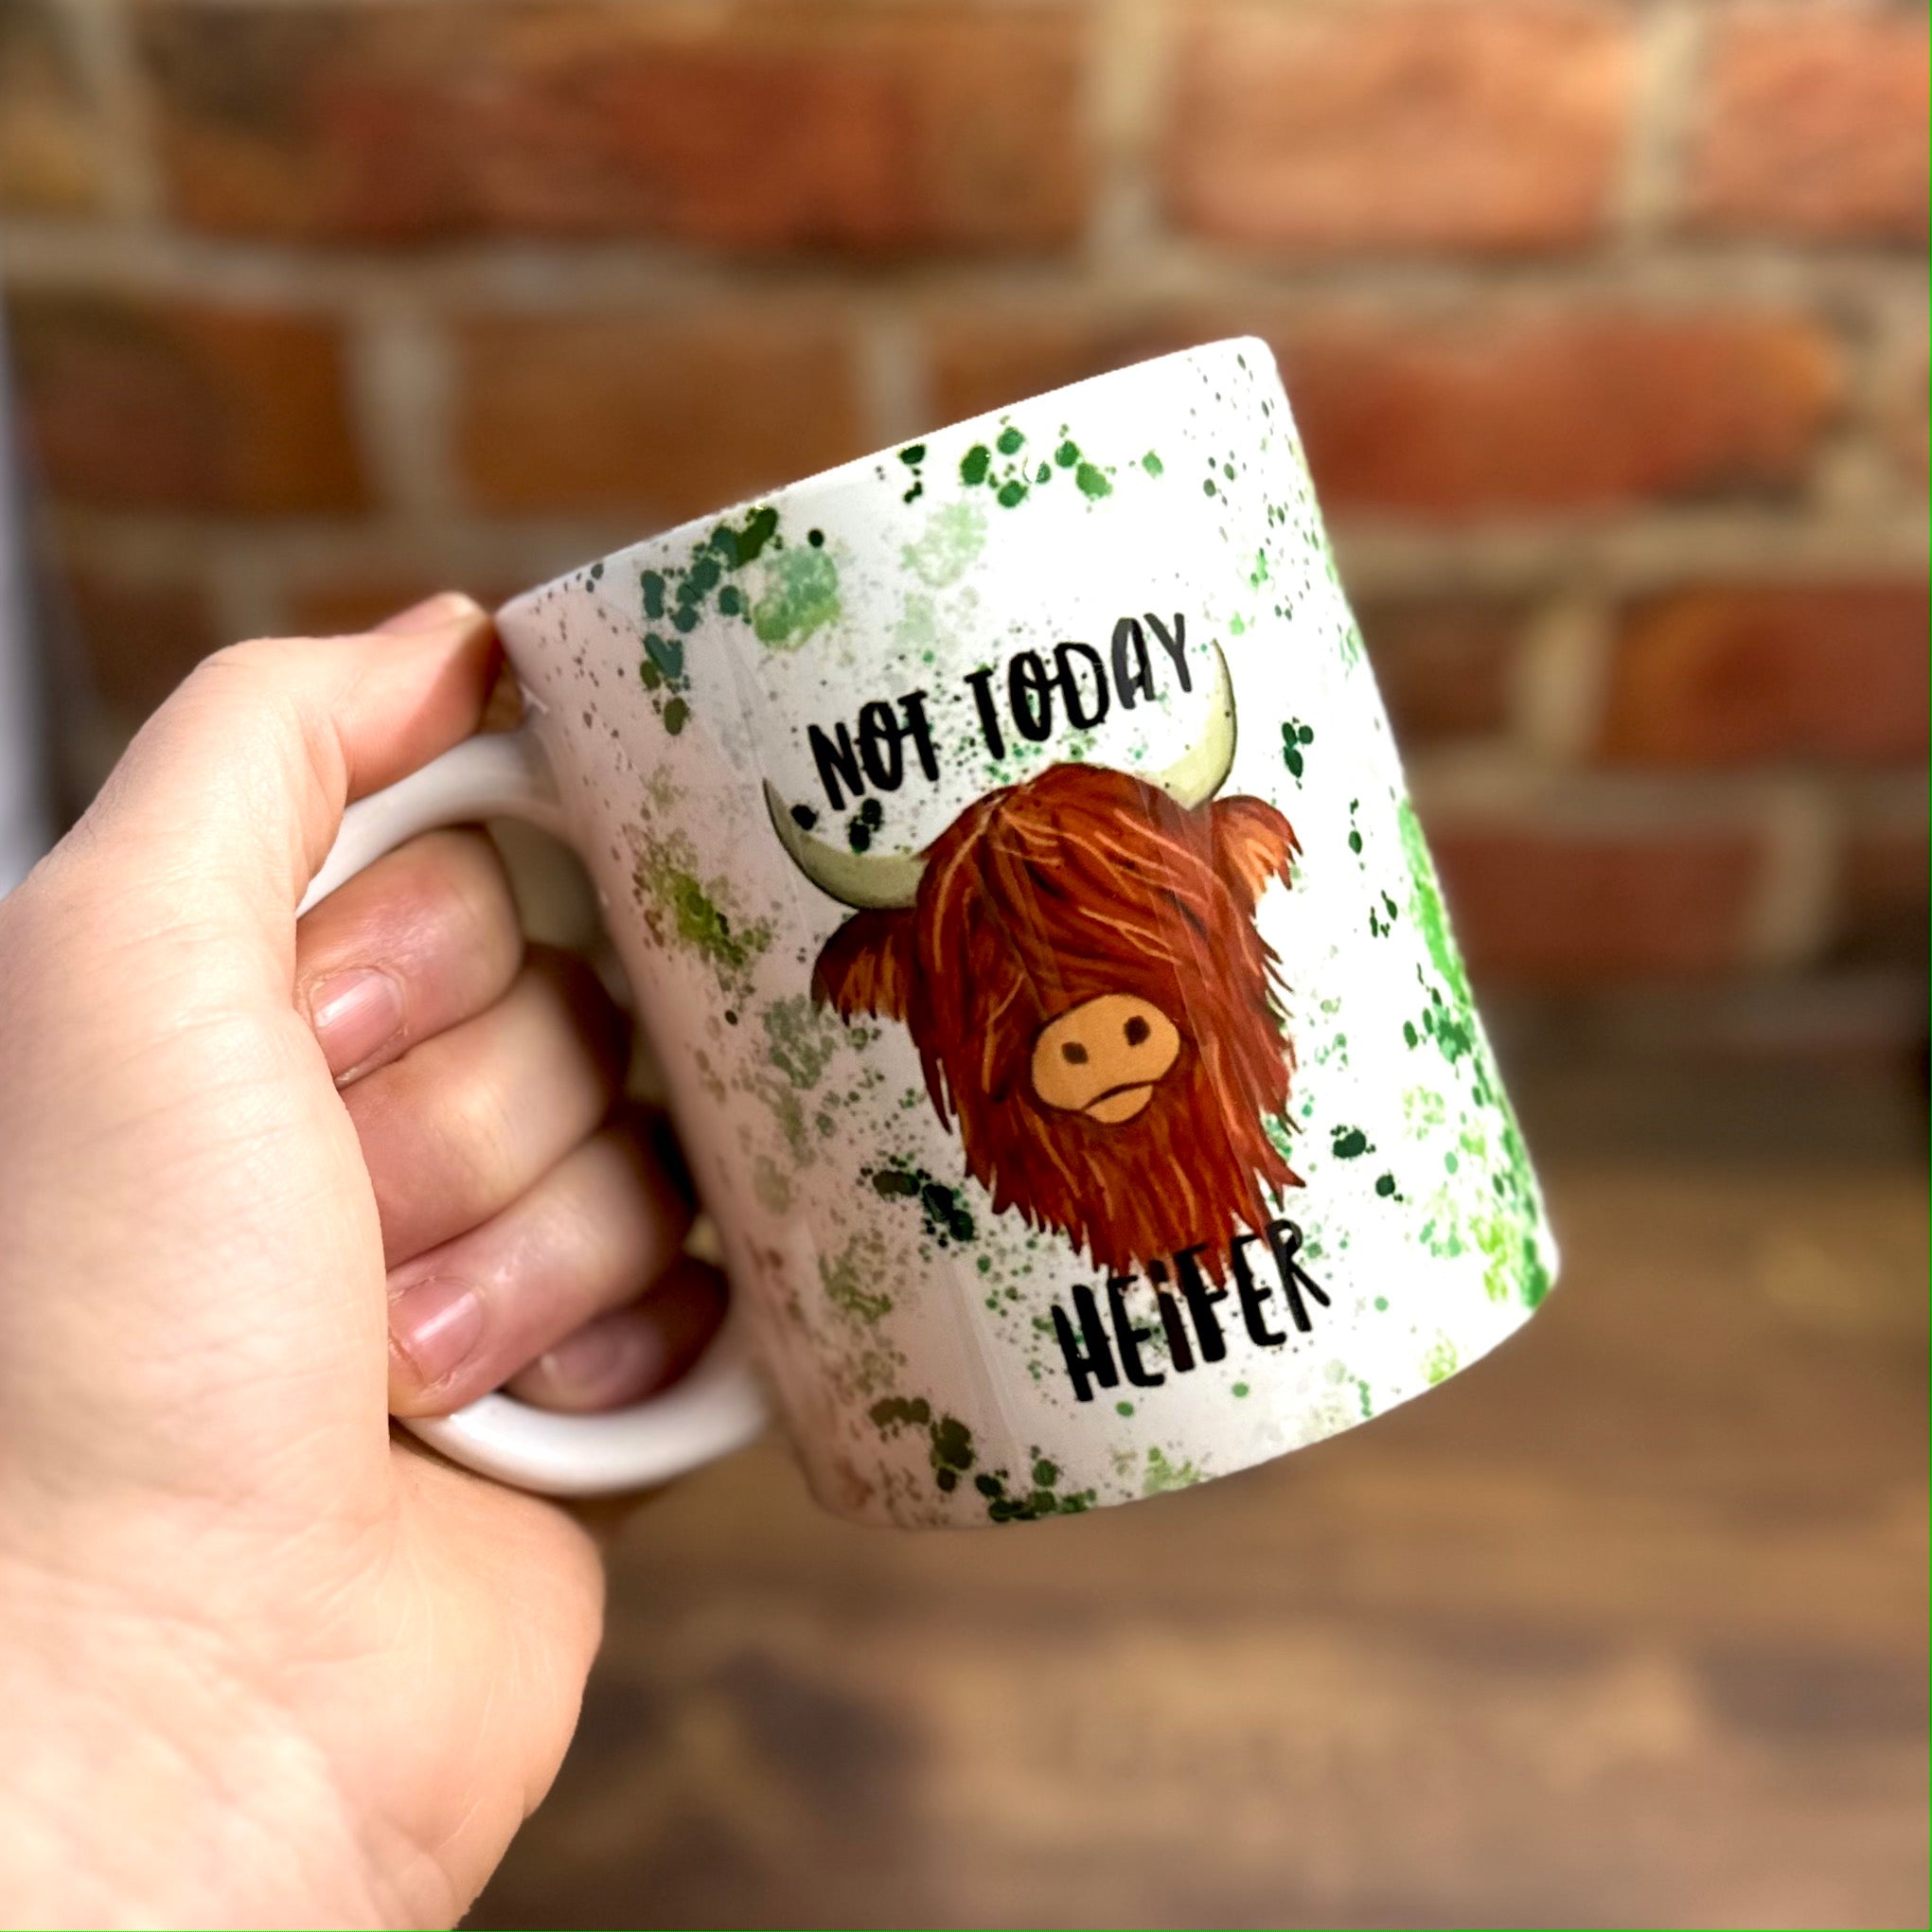 Brown Highland Coo Not Today Heifer or Not in the Mooood 11oz Ceramic Mug